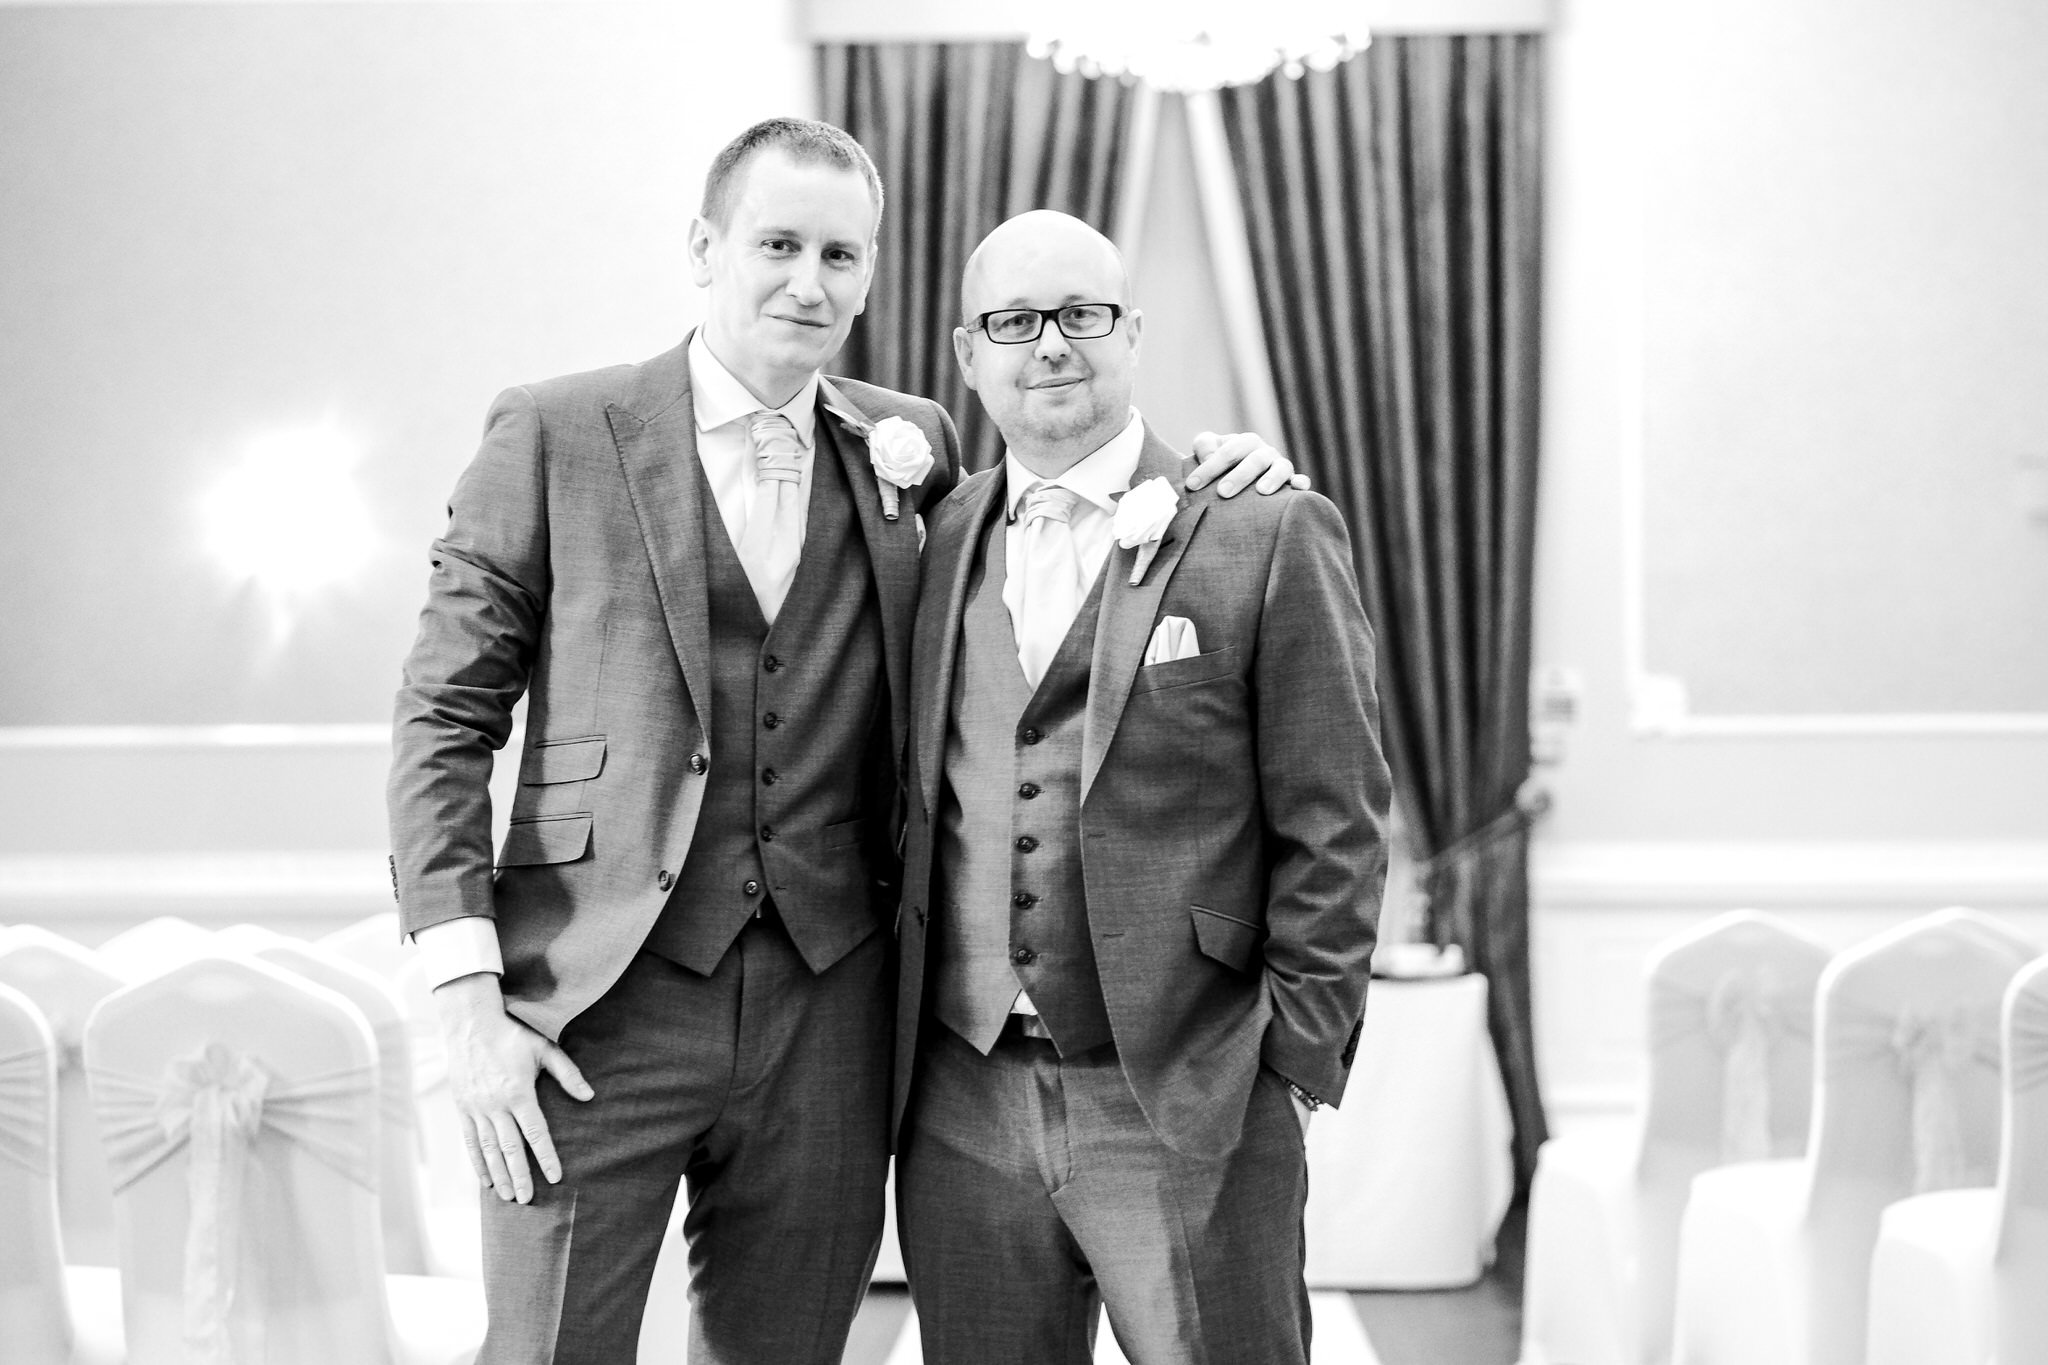 groom and best man - Authentic Wedding photography.jpg